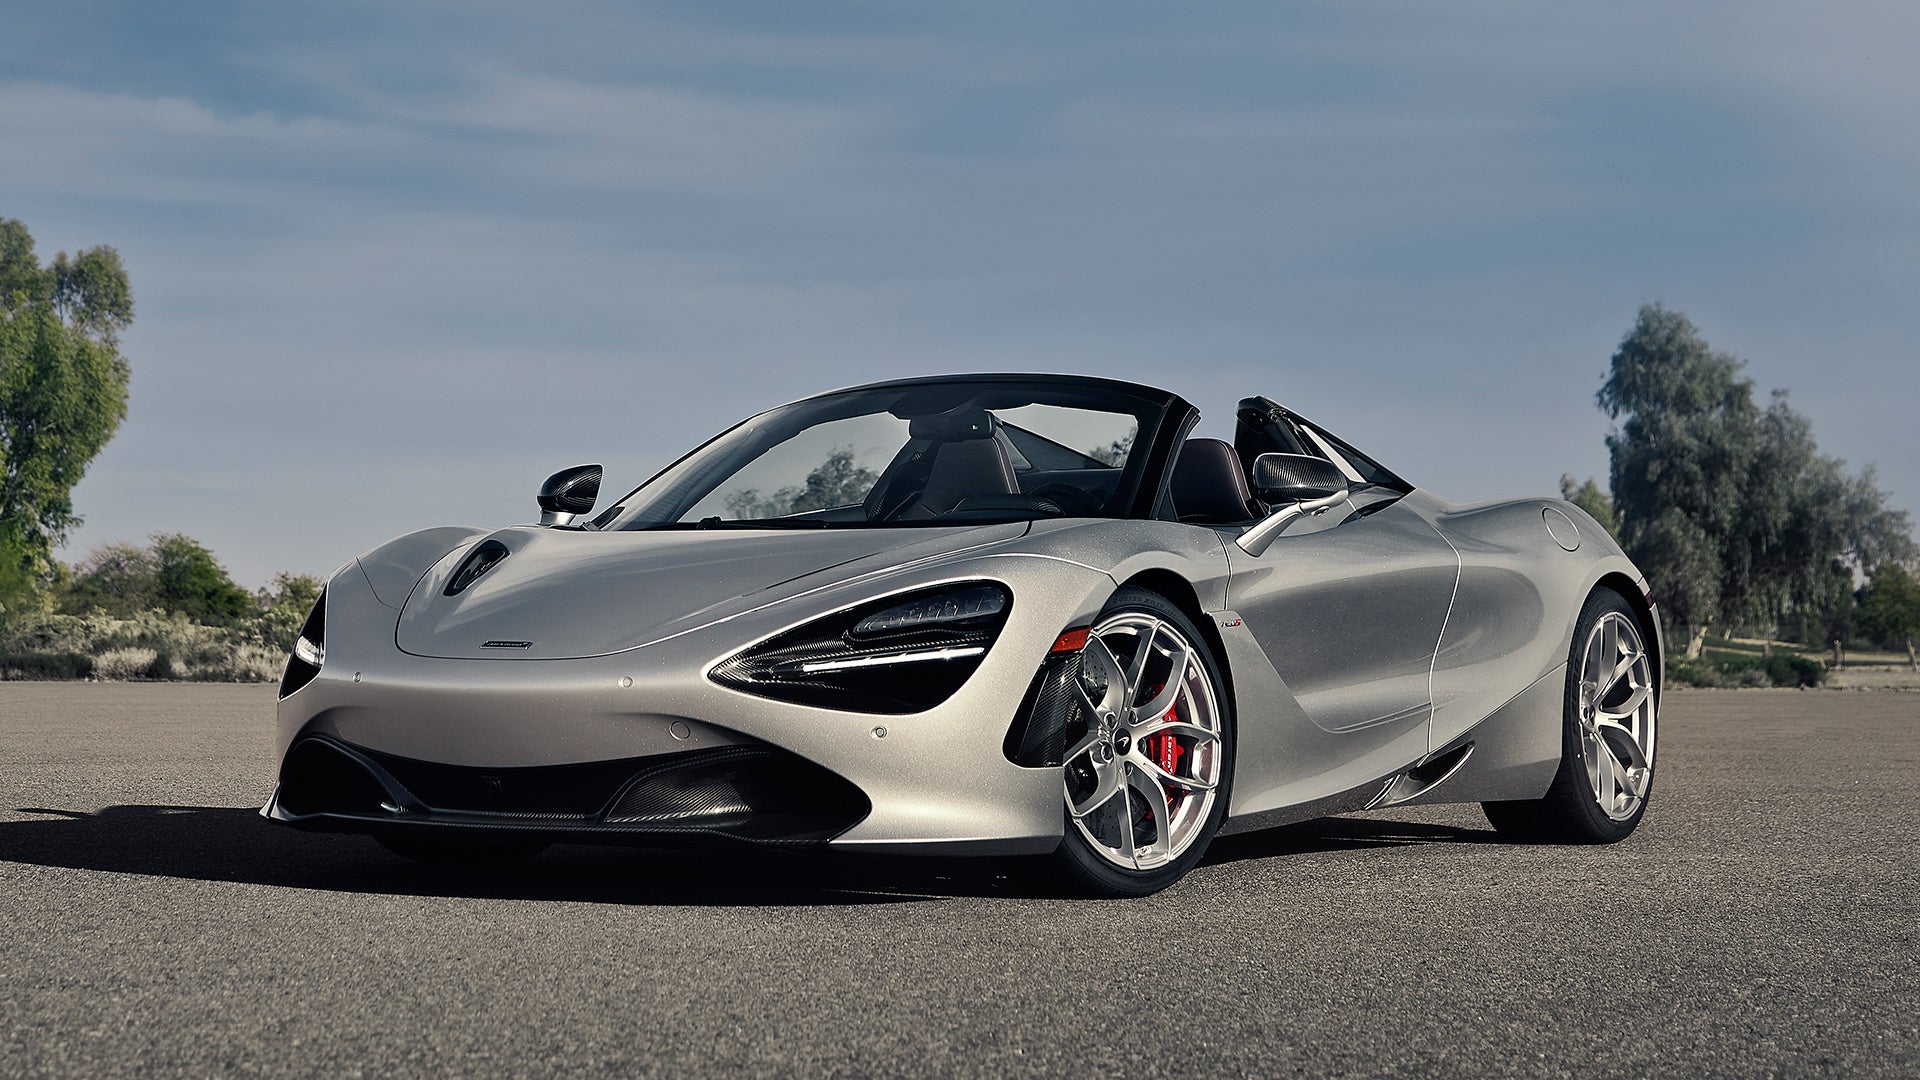 2019 McLaren 720S Spider First Drive Review: A Supercar Roadster Worth  Trading the Wedding Registry For